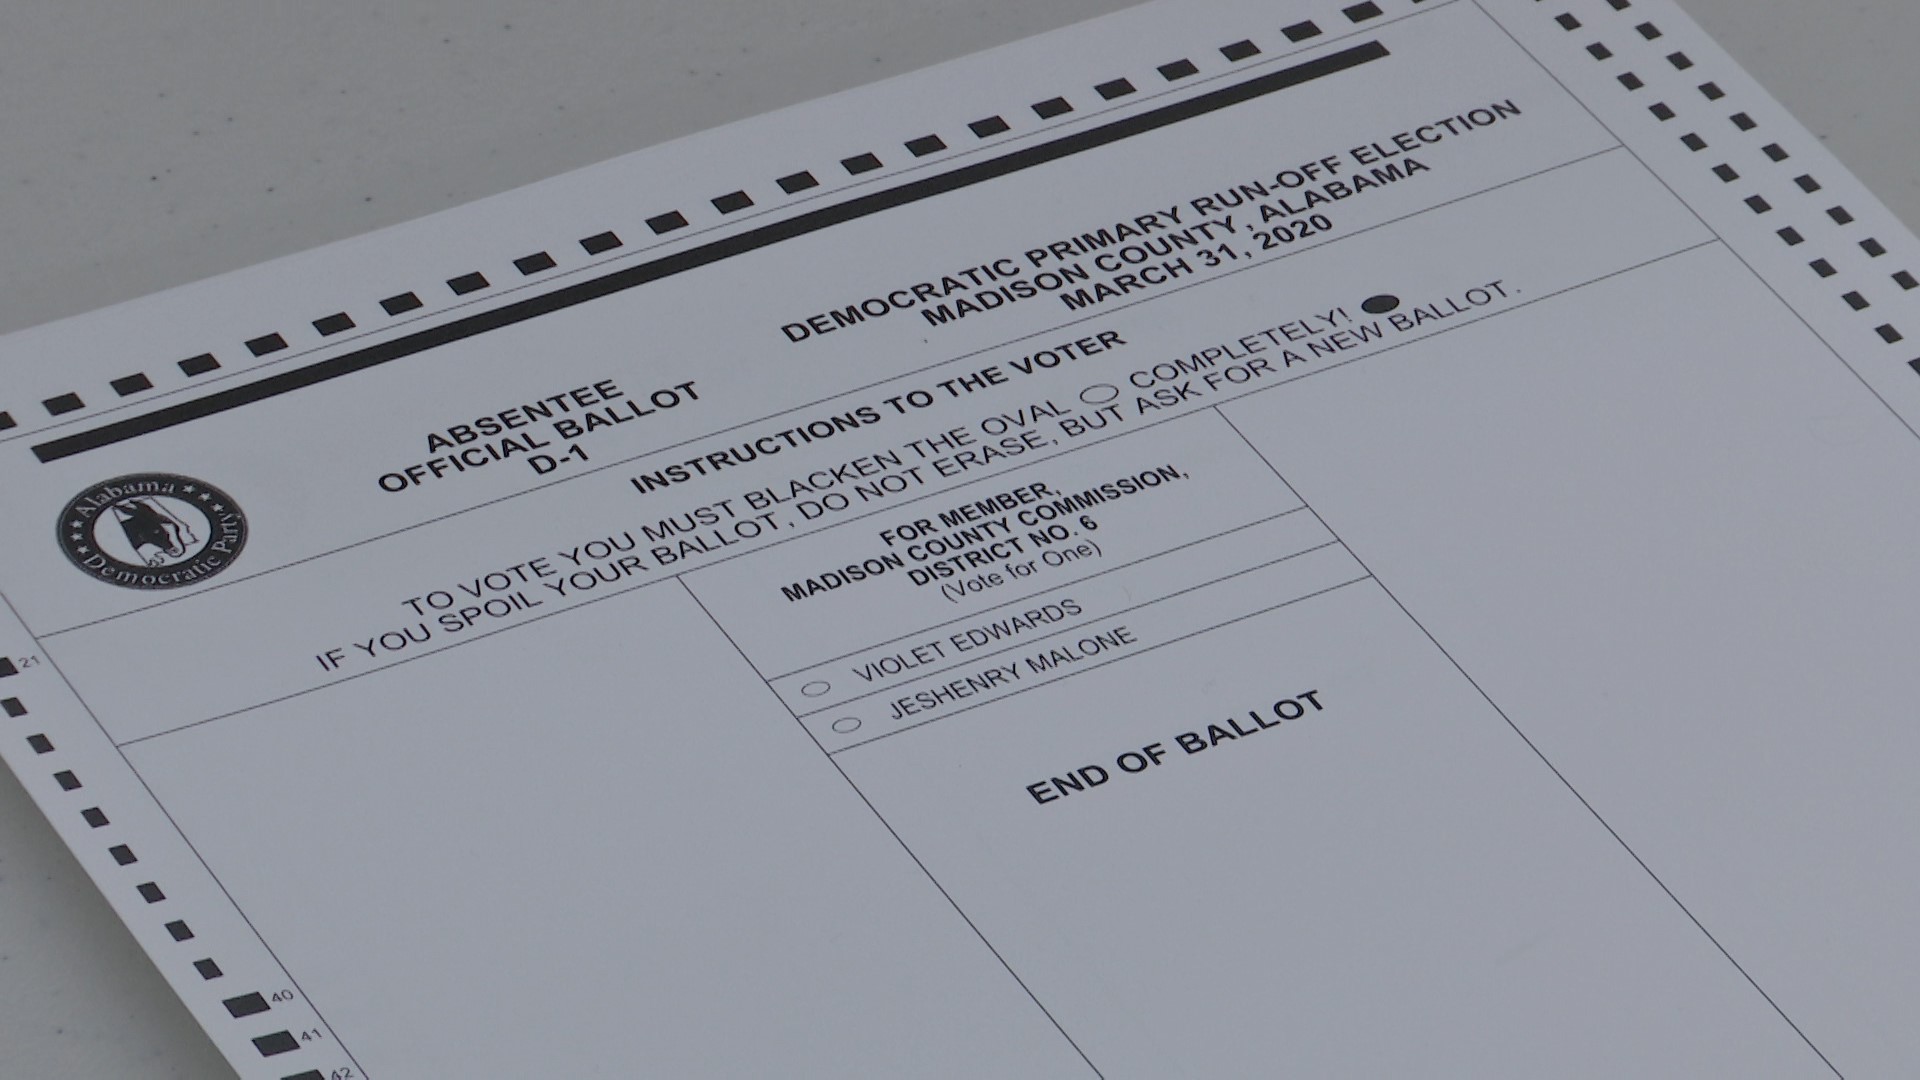 Filling out an absentee ballot for the first time? Make sure you don't miss anything.